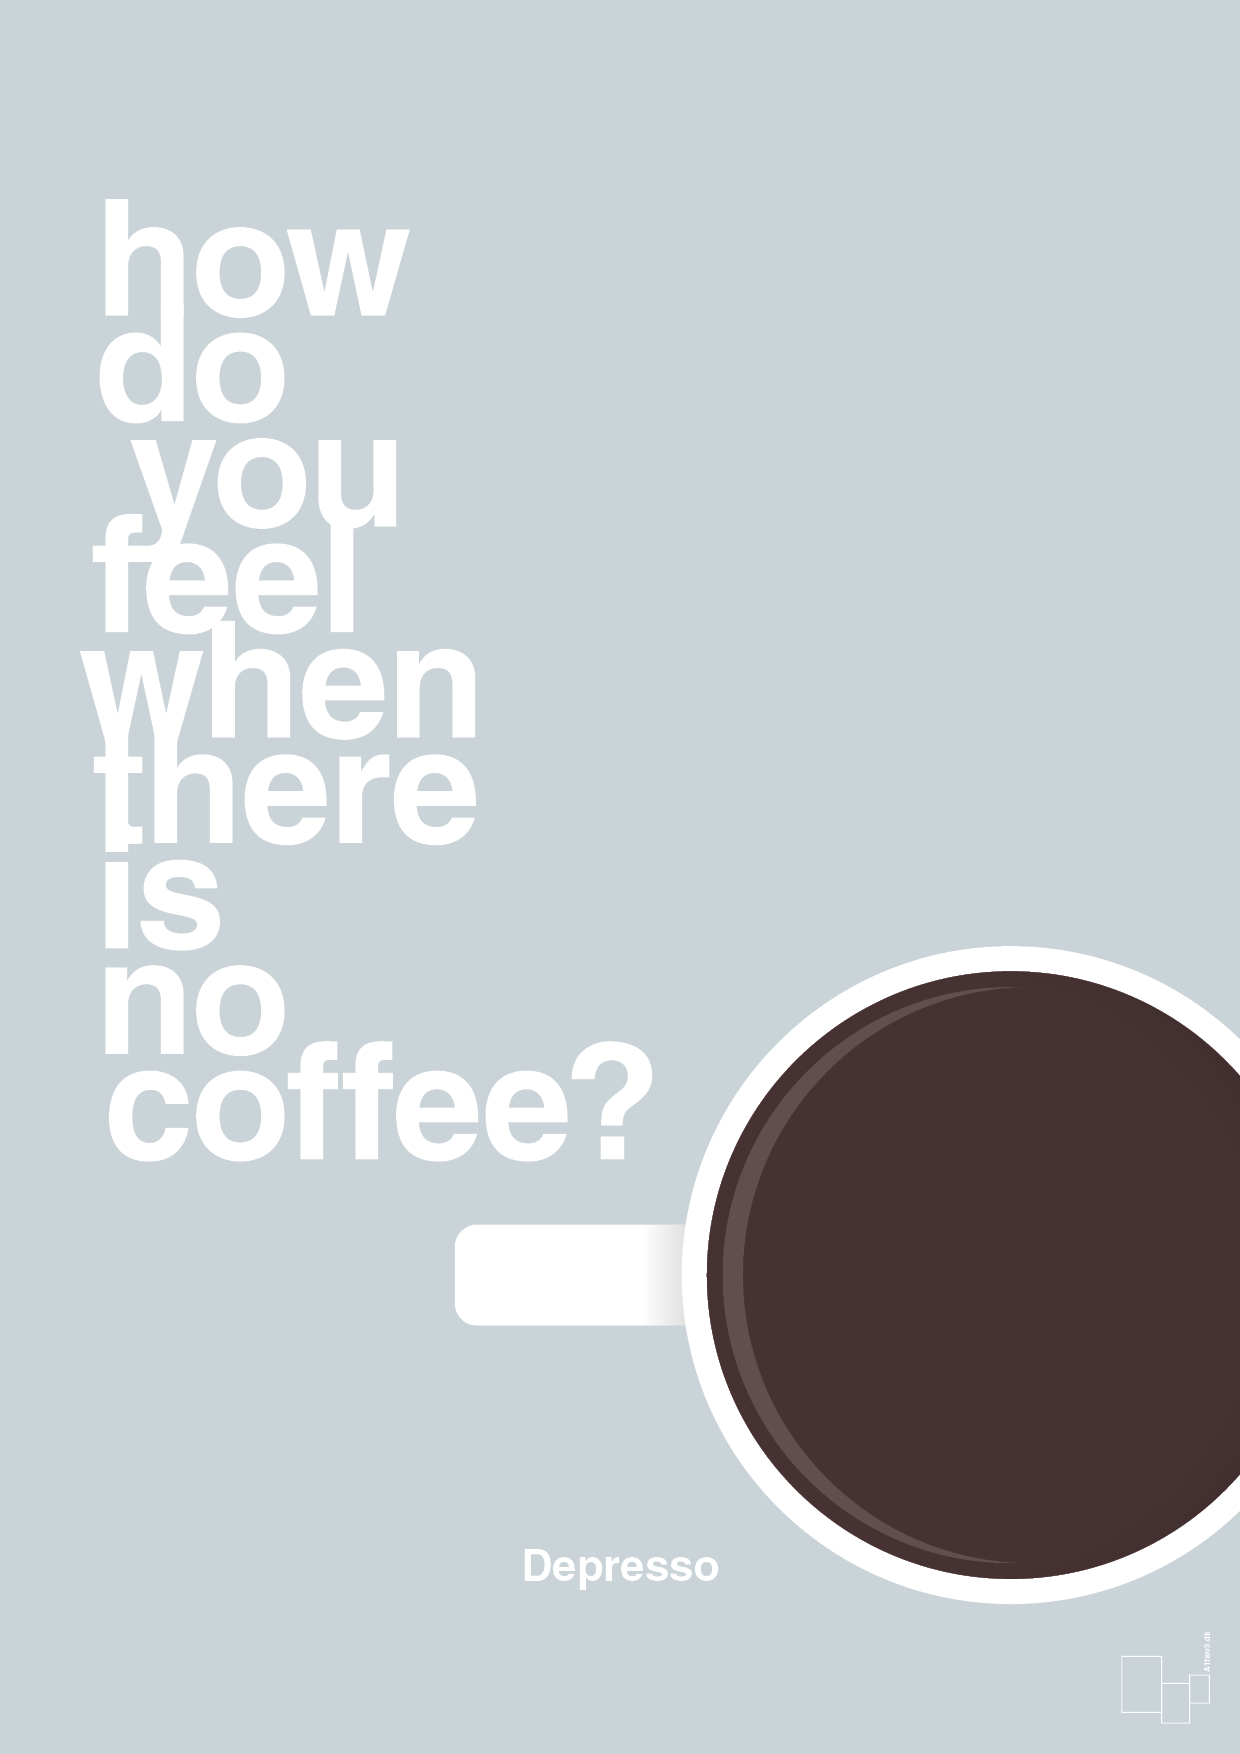 how do you feel when there is no coffee? depresso - Plakat med Mad & Drikke i Light Drizzle